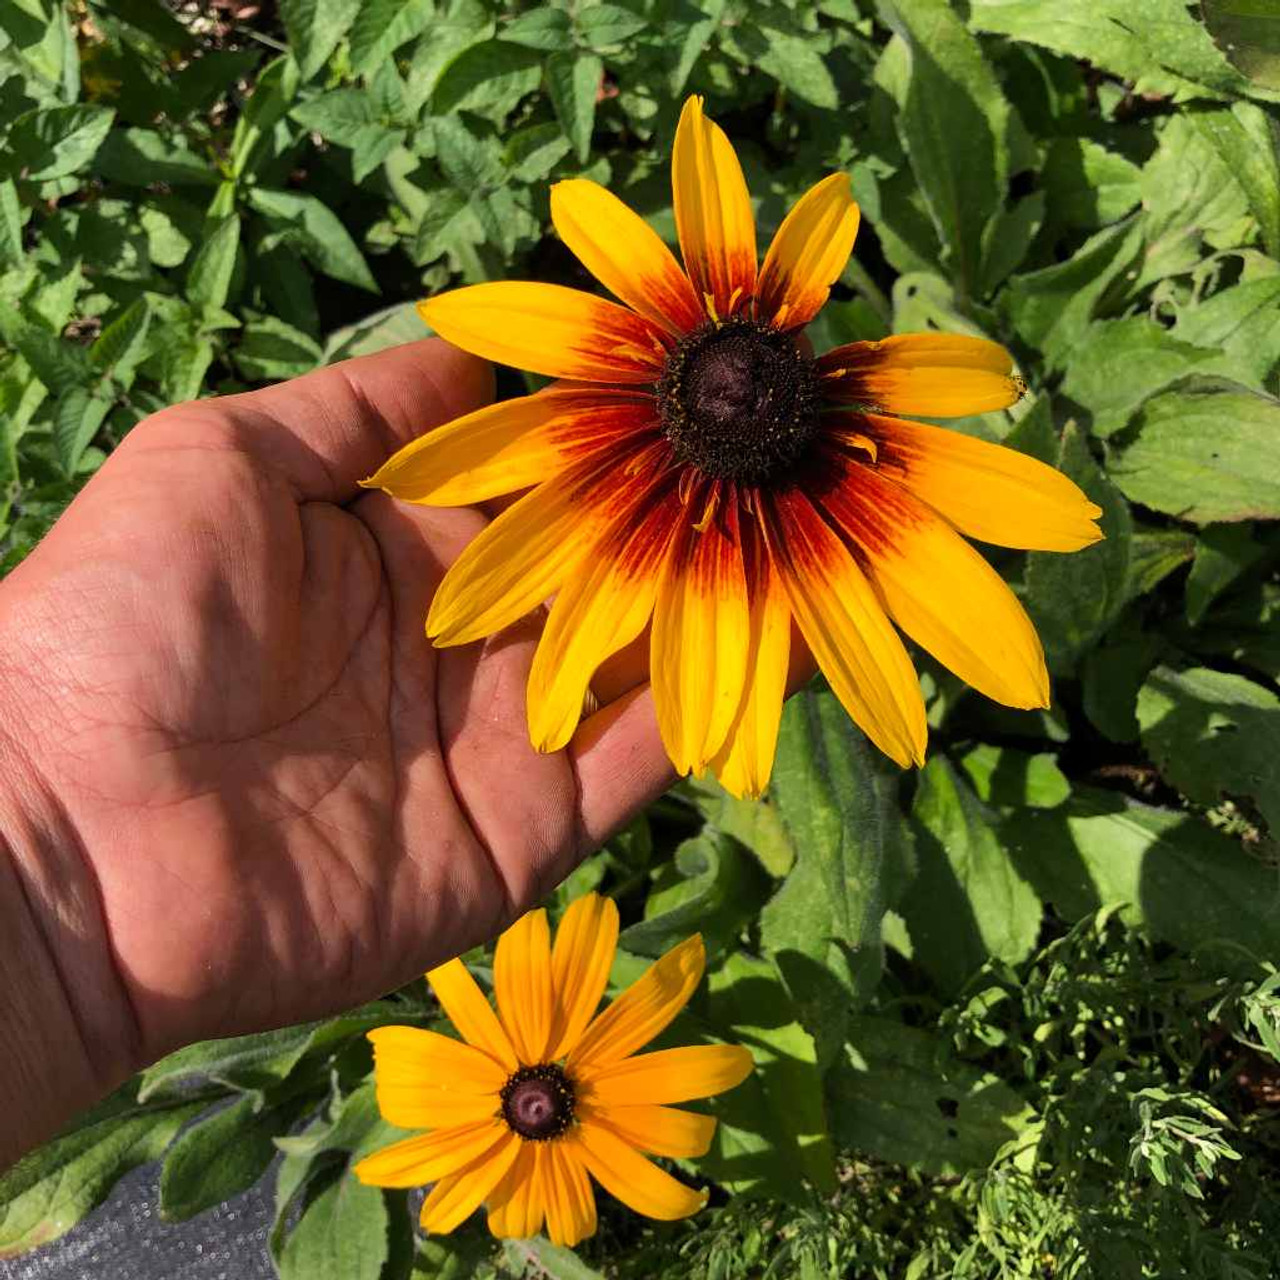 Gloria Daisy - Rudbeckia hirta - is short lived perennial with extra large flowers with brownish eye